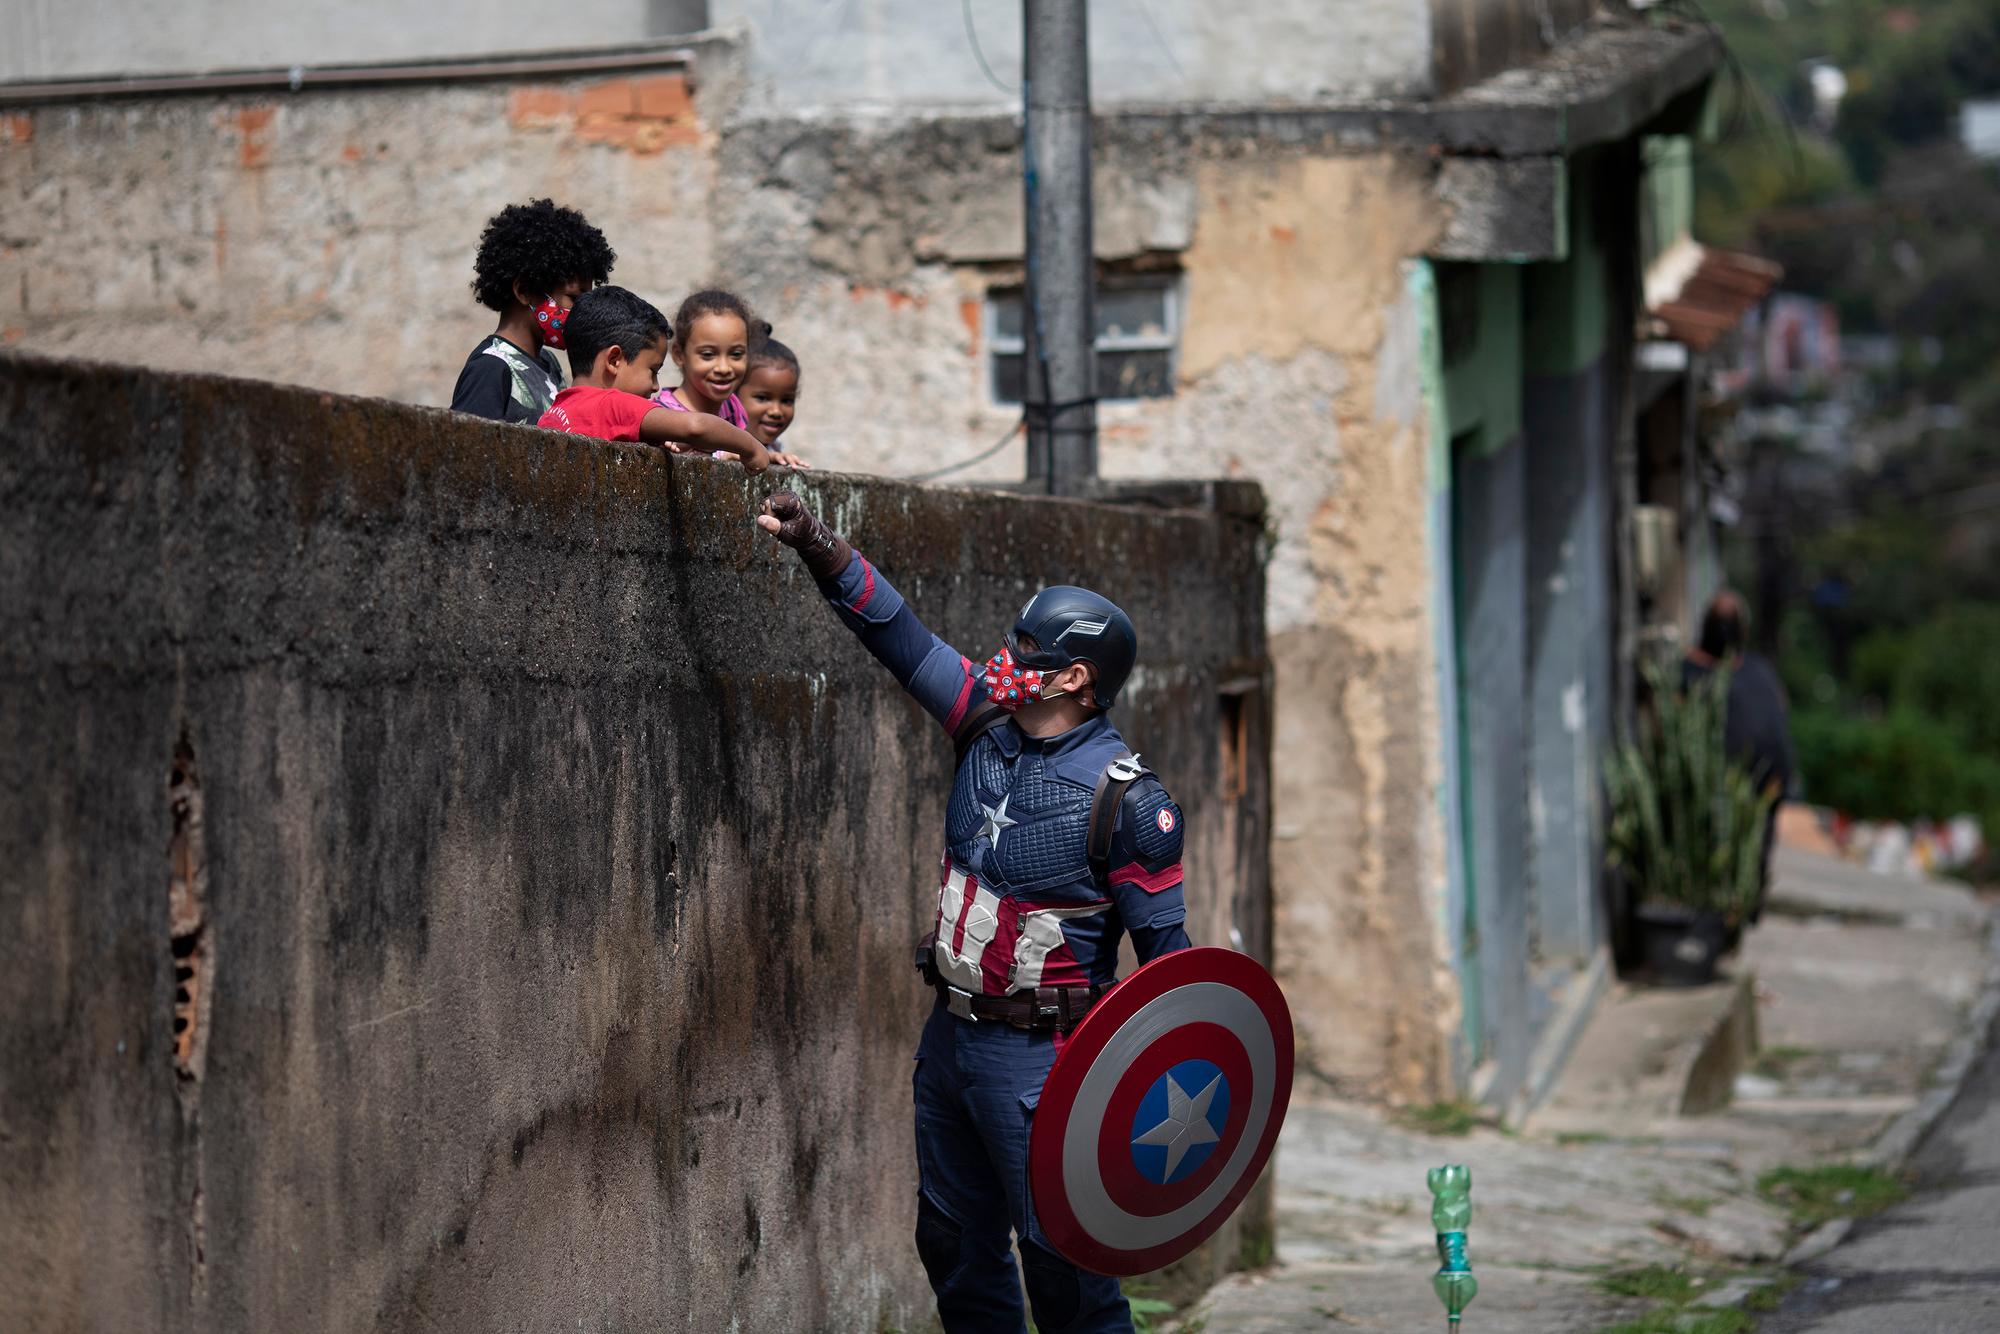 Military police officer Everaldo Pinto, dressed as superhero Captain America, greets children and encourages them to protect themselves during the COVID-19 pandemic in Petropolis, Rio de Janeiro state, Brazil, on April 15, 2021. (AP Photo/Silvia Izquierdo)